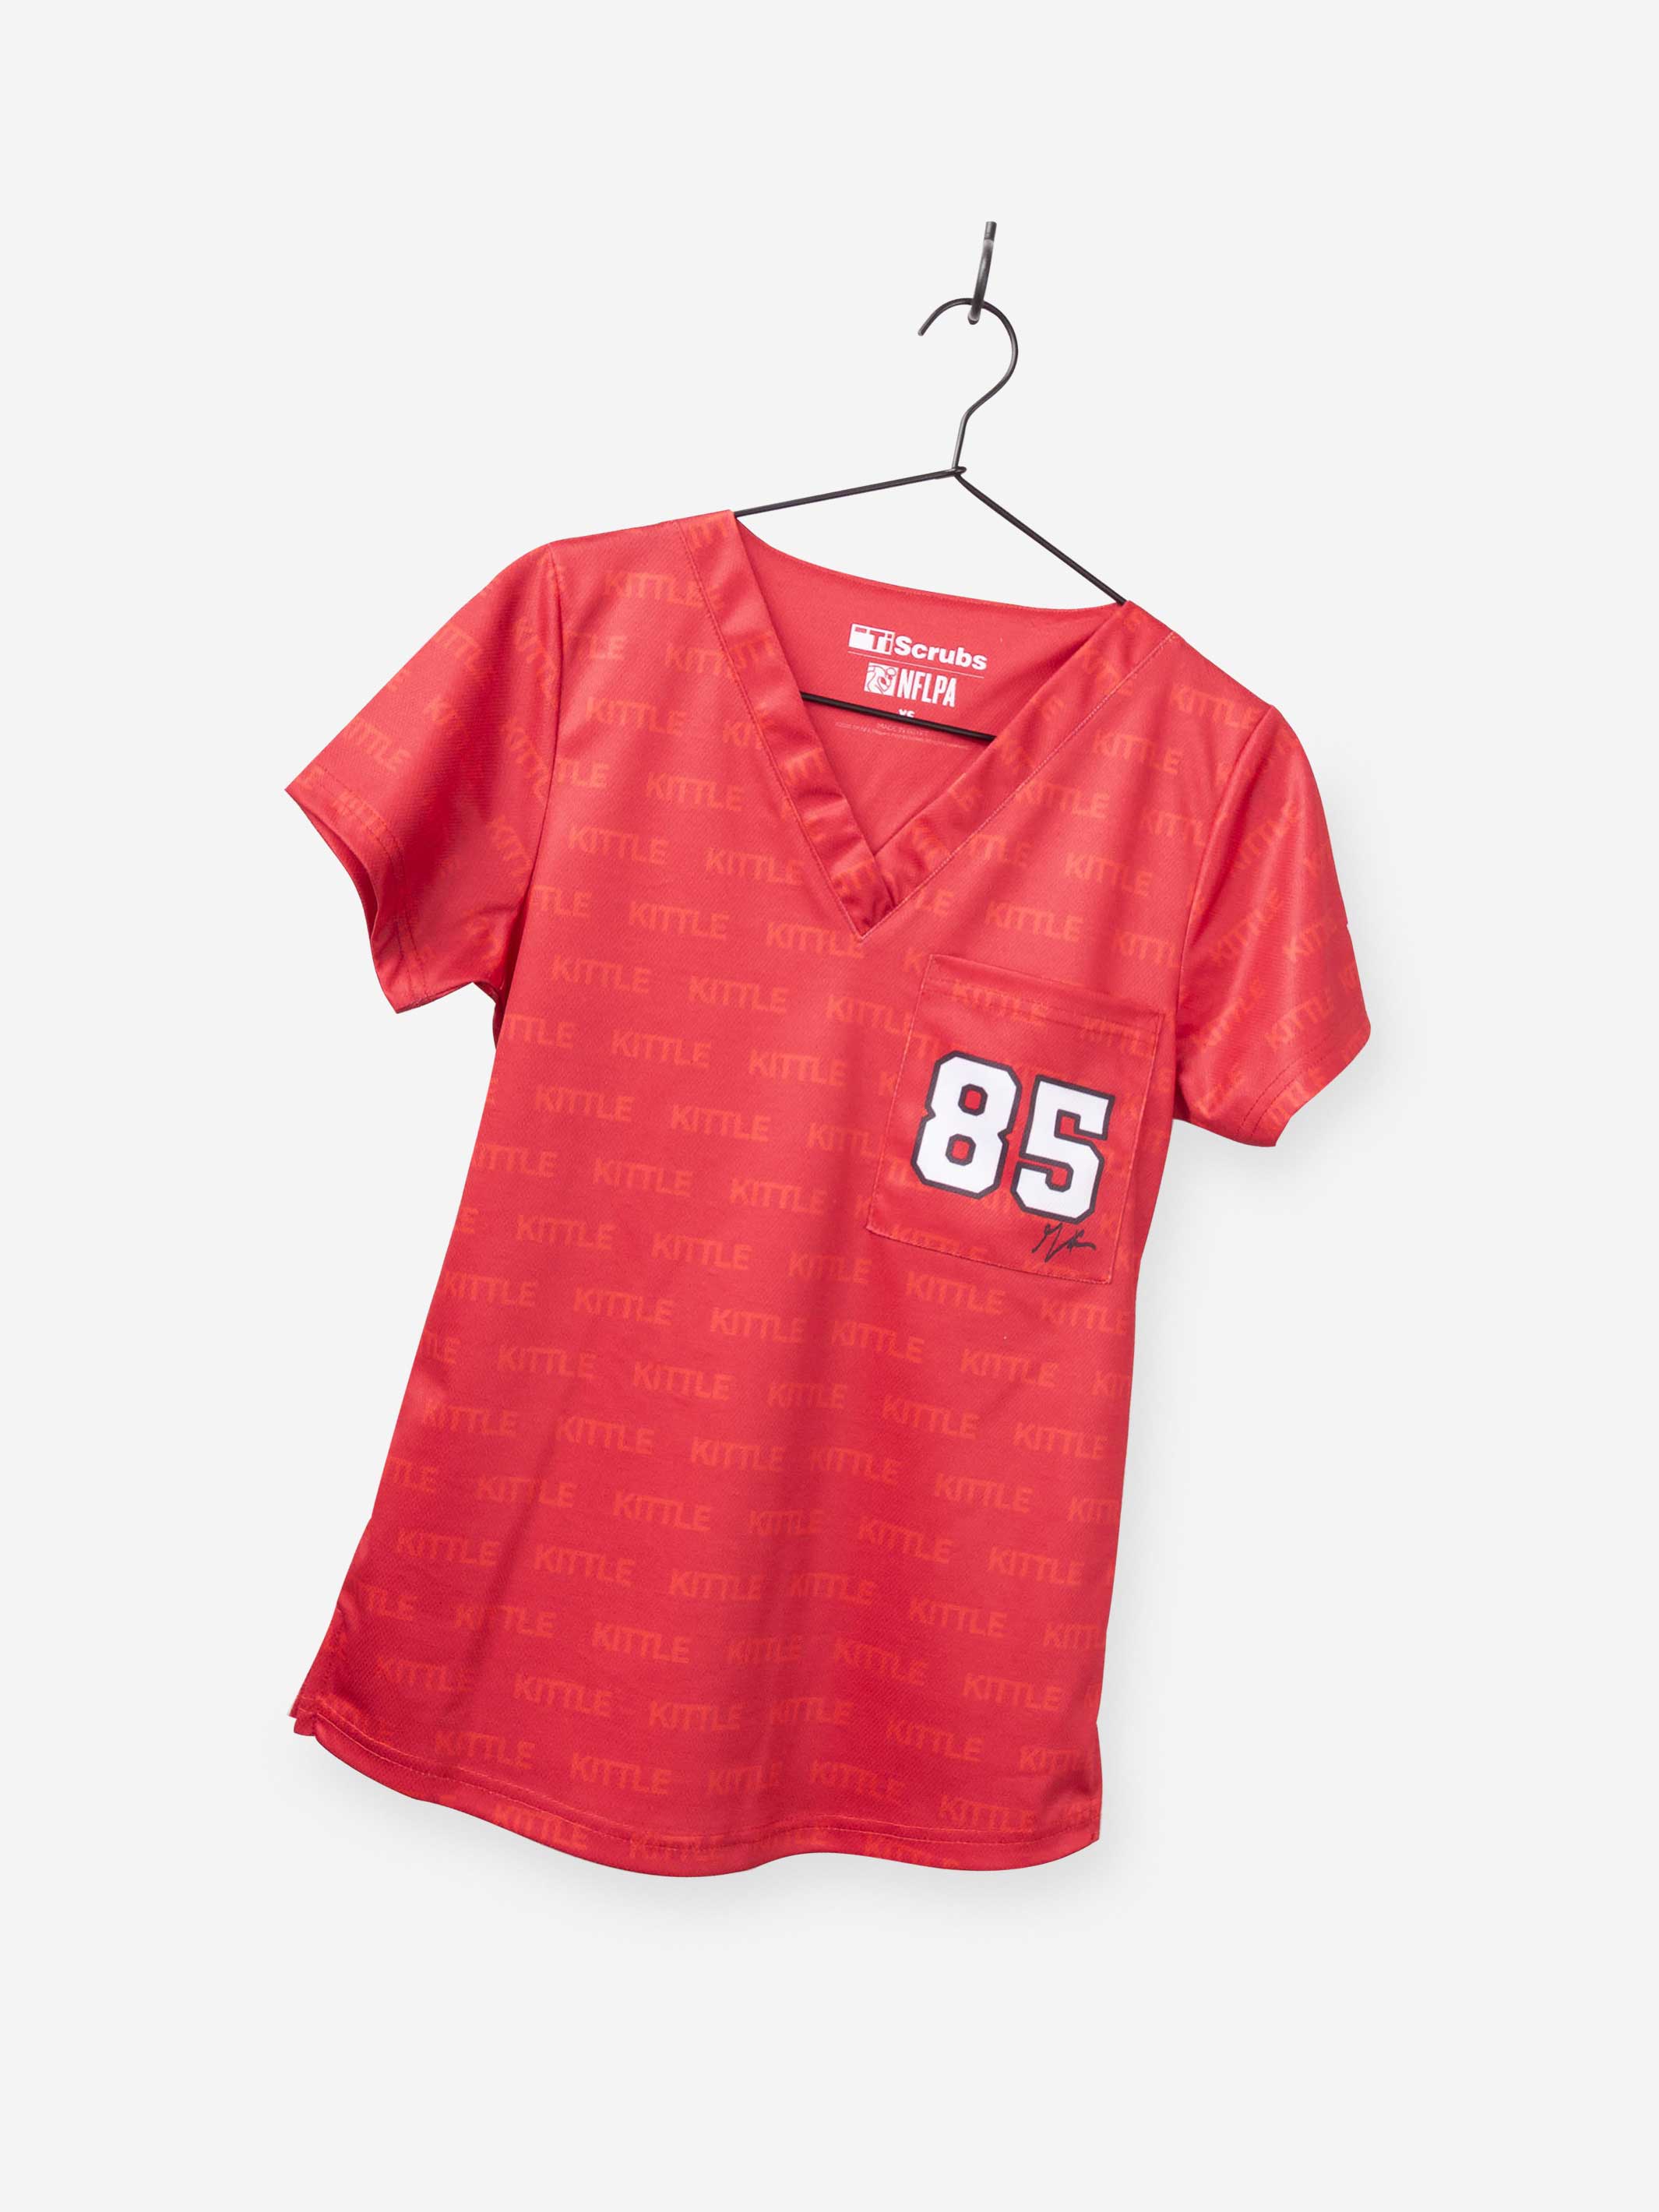 Women&#39;s George Kittle Scrub Top in Red Jersey Color for football fans